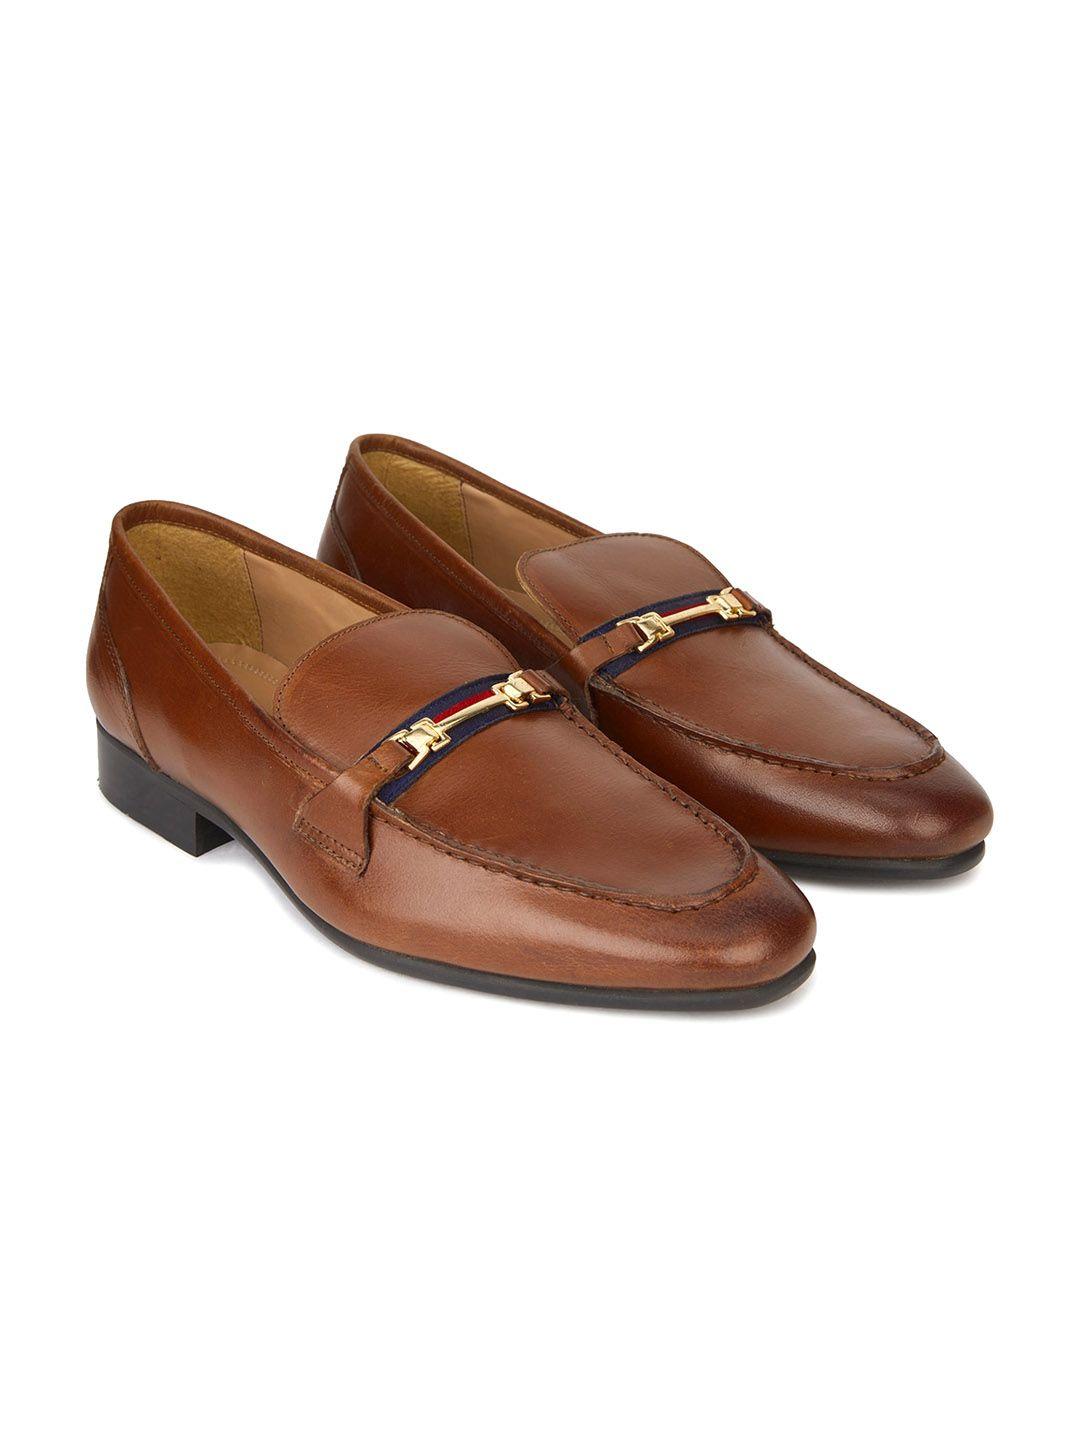 hats off accessories men leather formal loafers